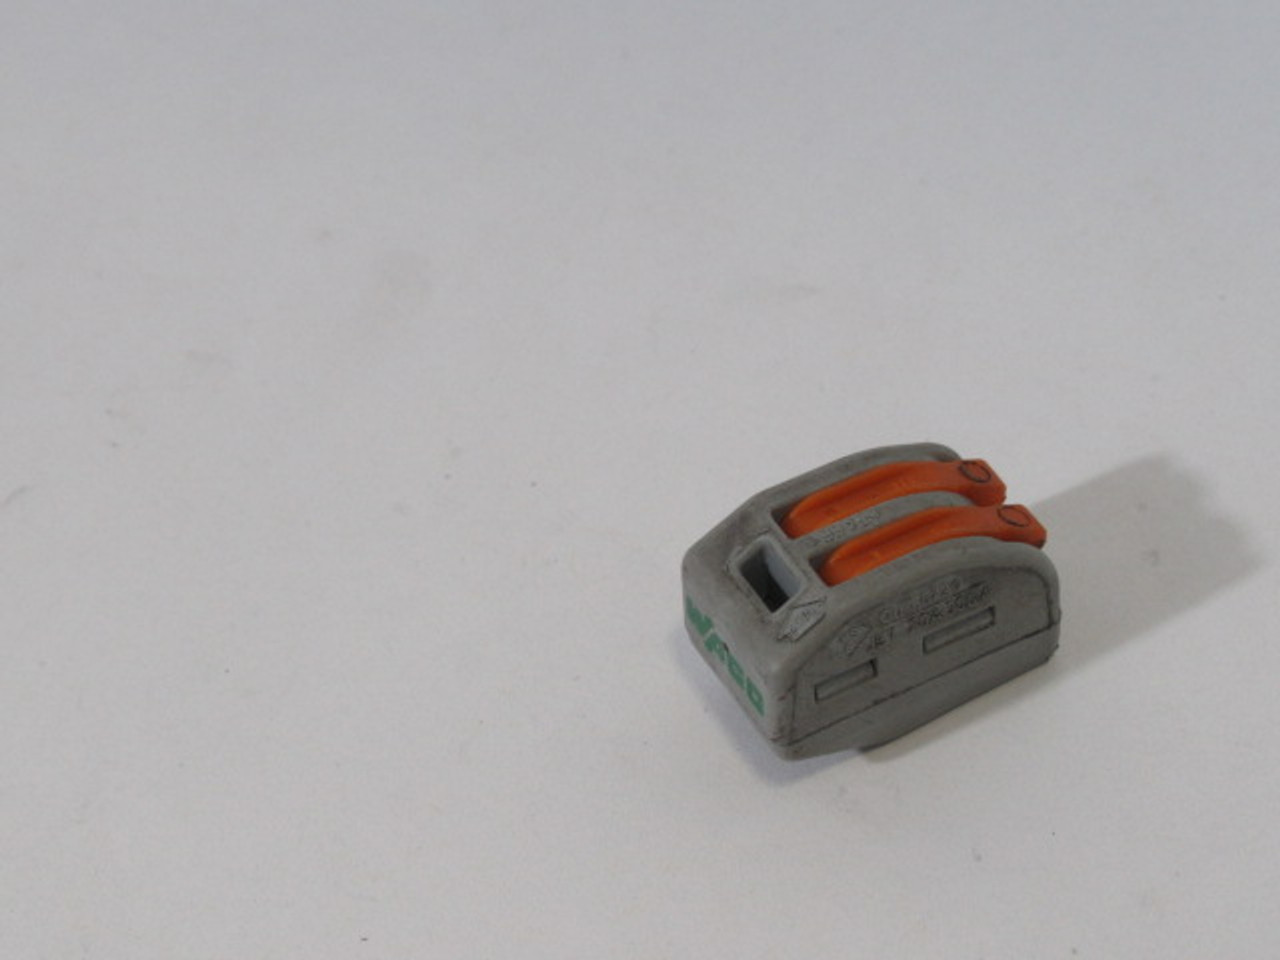 Wago 222-412 Pluggable Terminal Block Splicing Connector 24/32A 400V USED